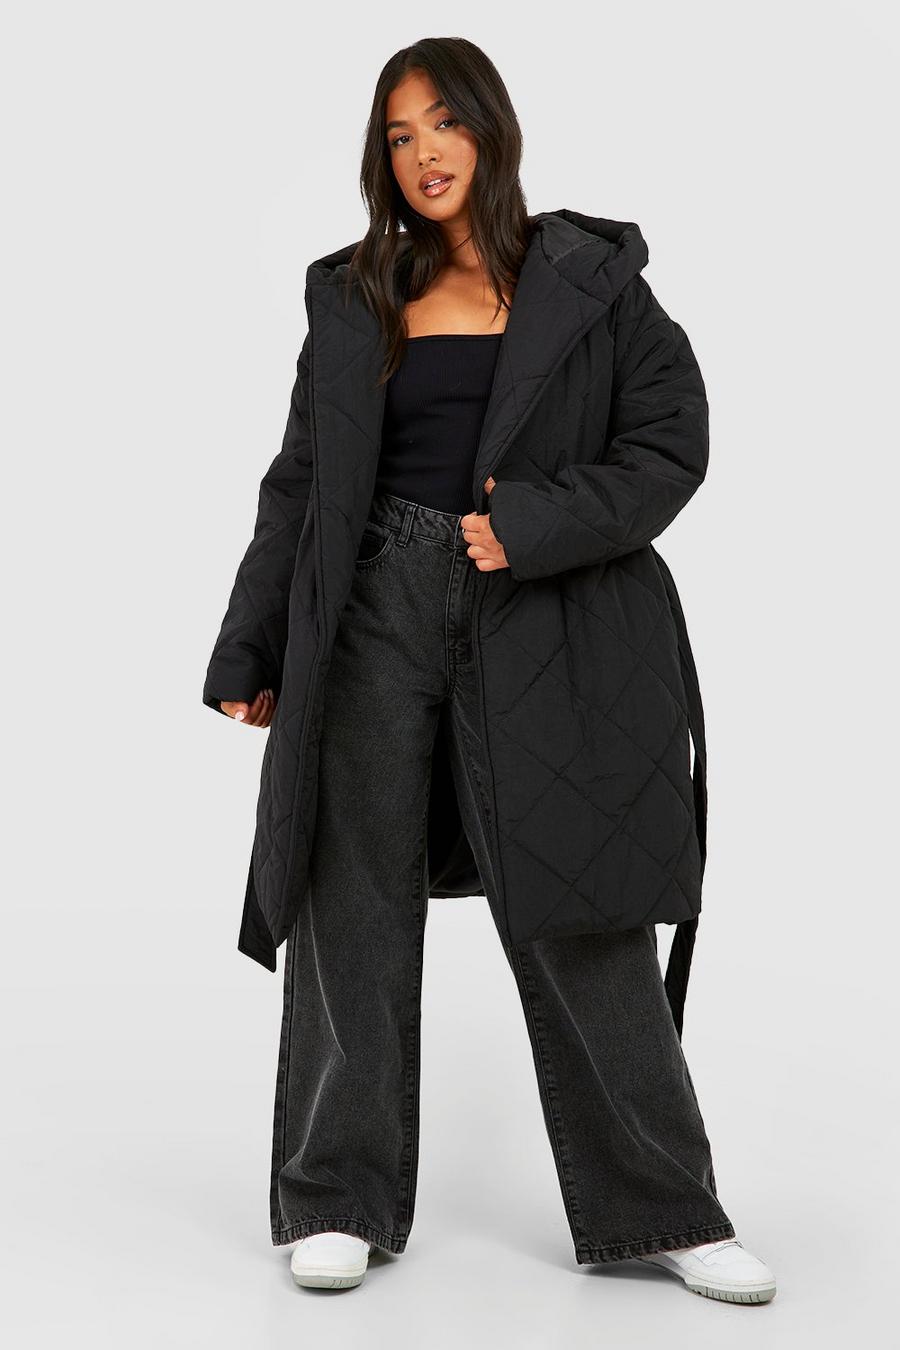 Black noir Petite Diamond Quilted Belted Puffer Jacket